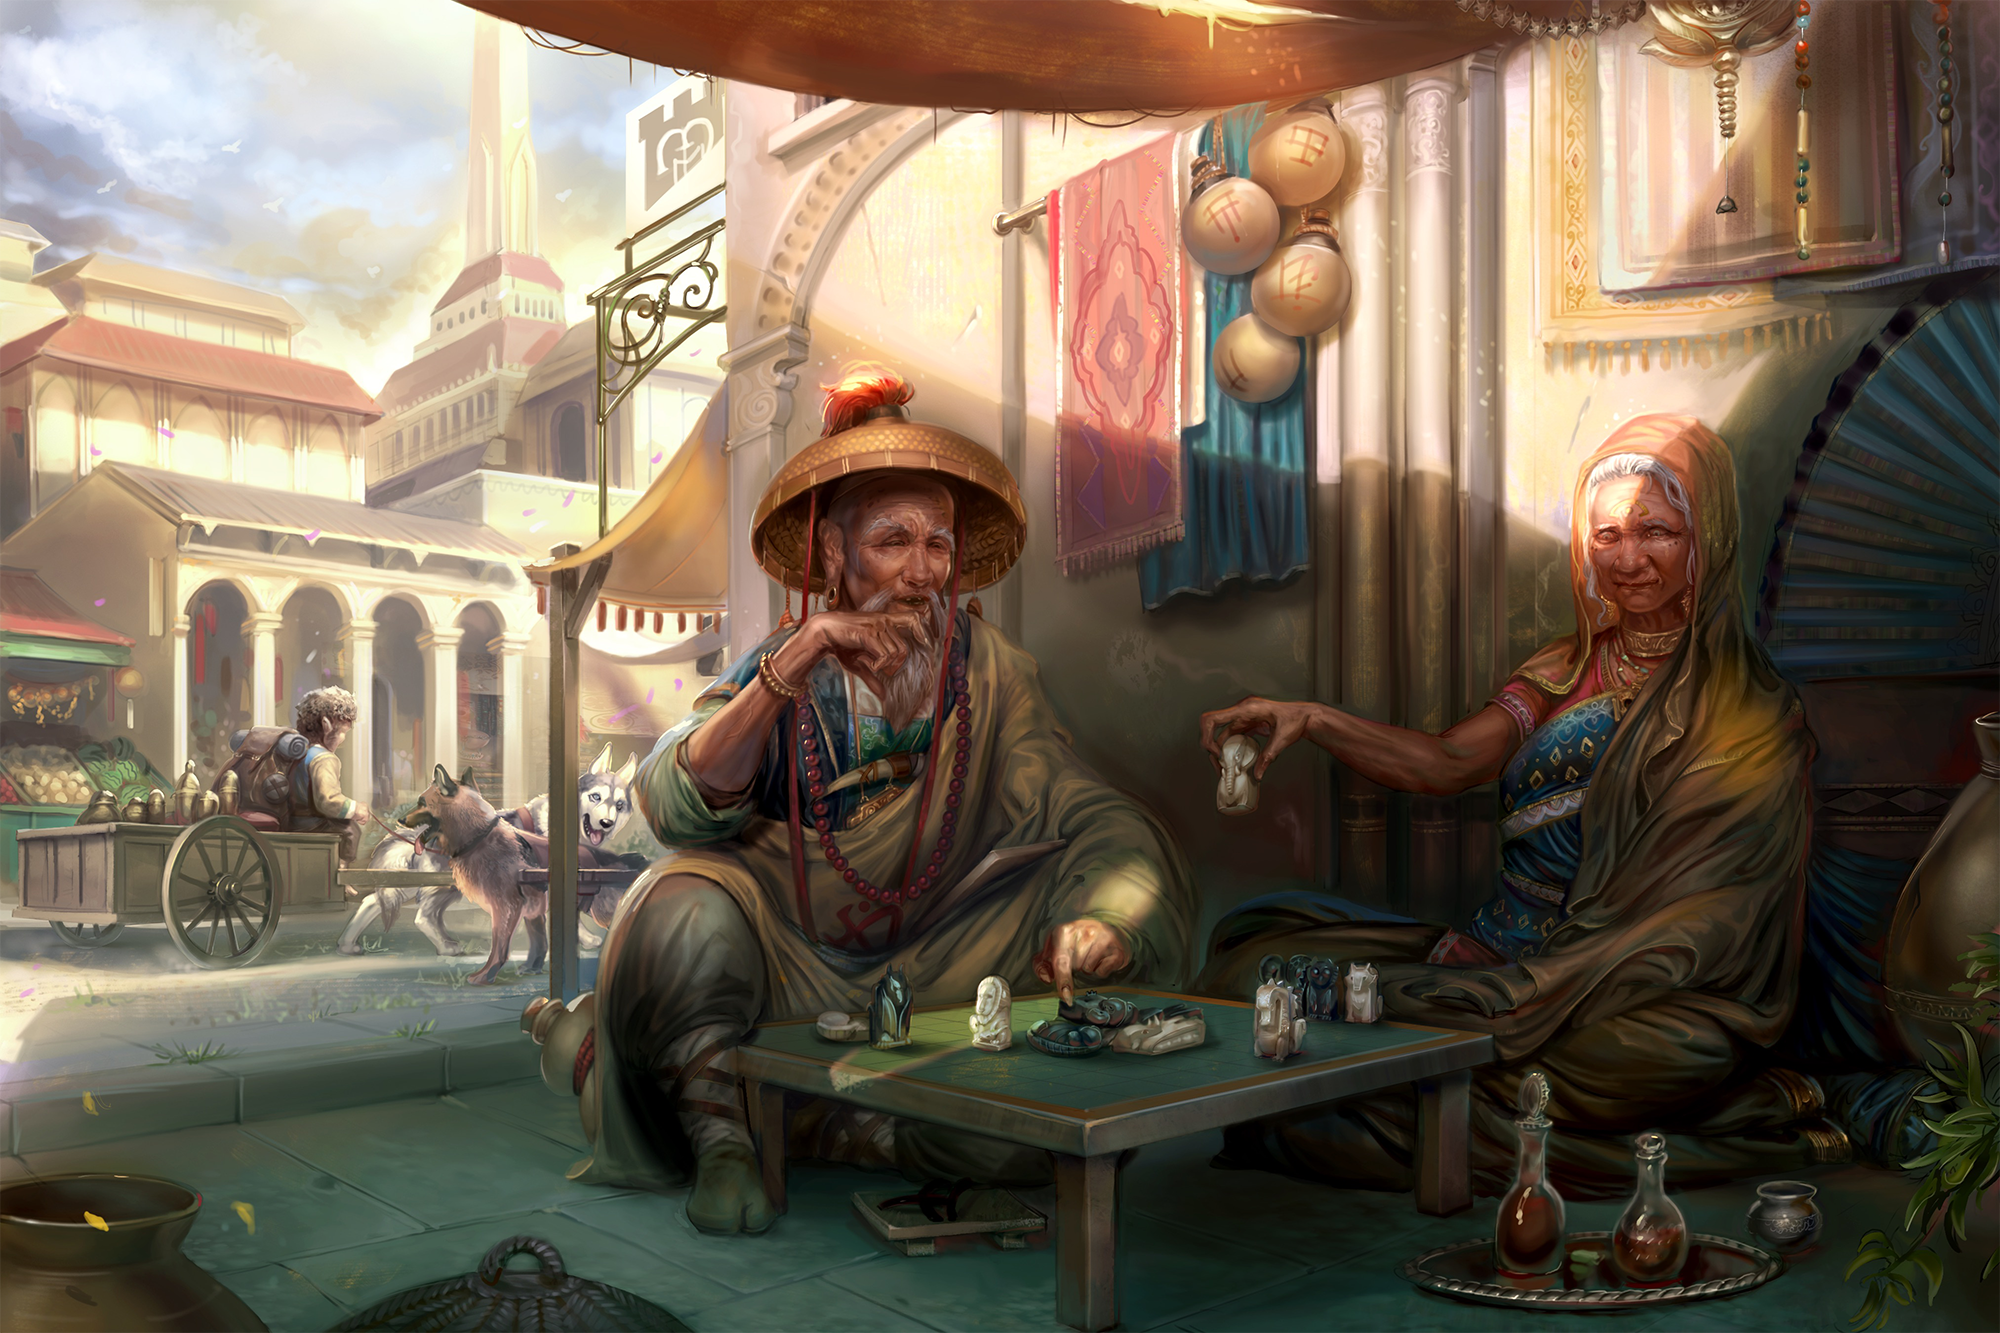 Under an awning on a busy urban street, an elderly man and woman sit across from one another at a game board covered in intricate tiles